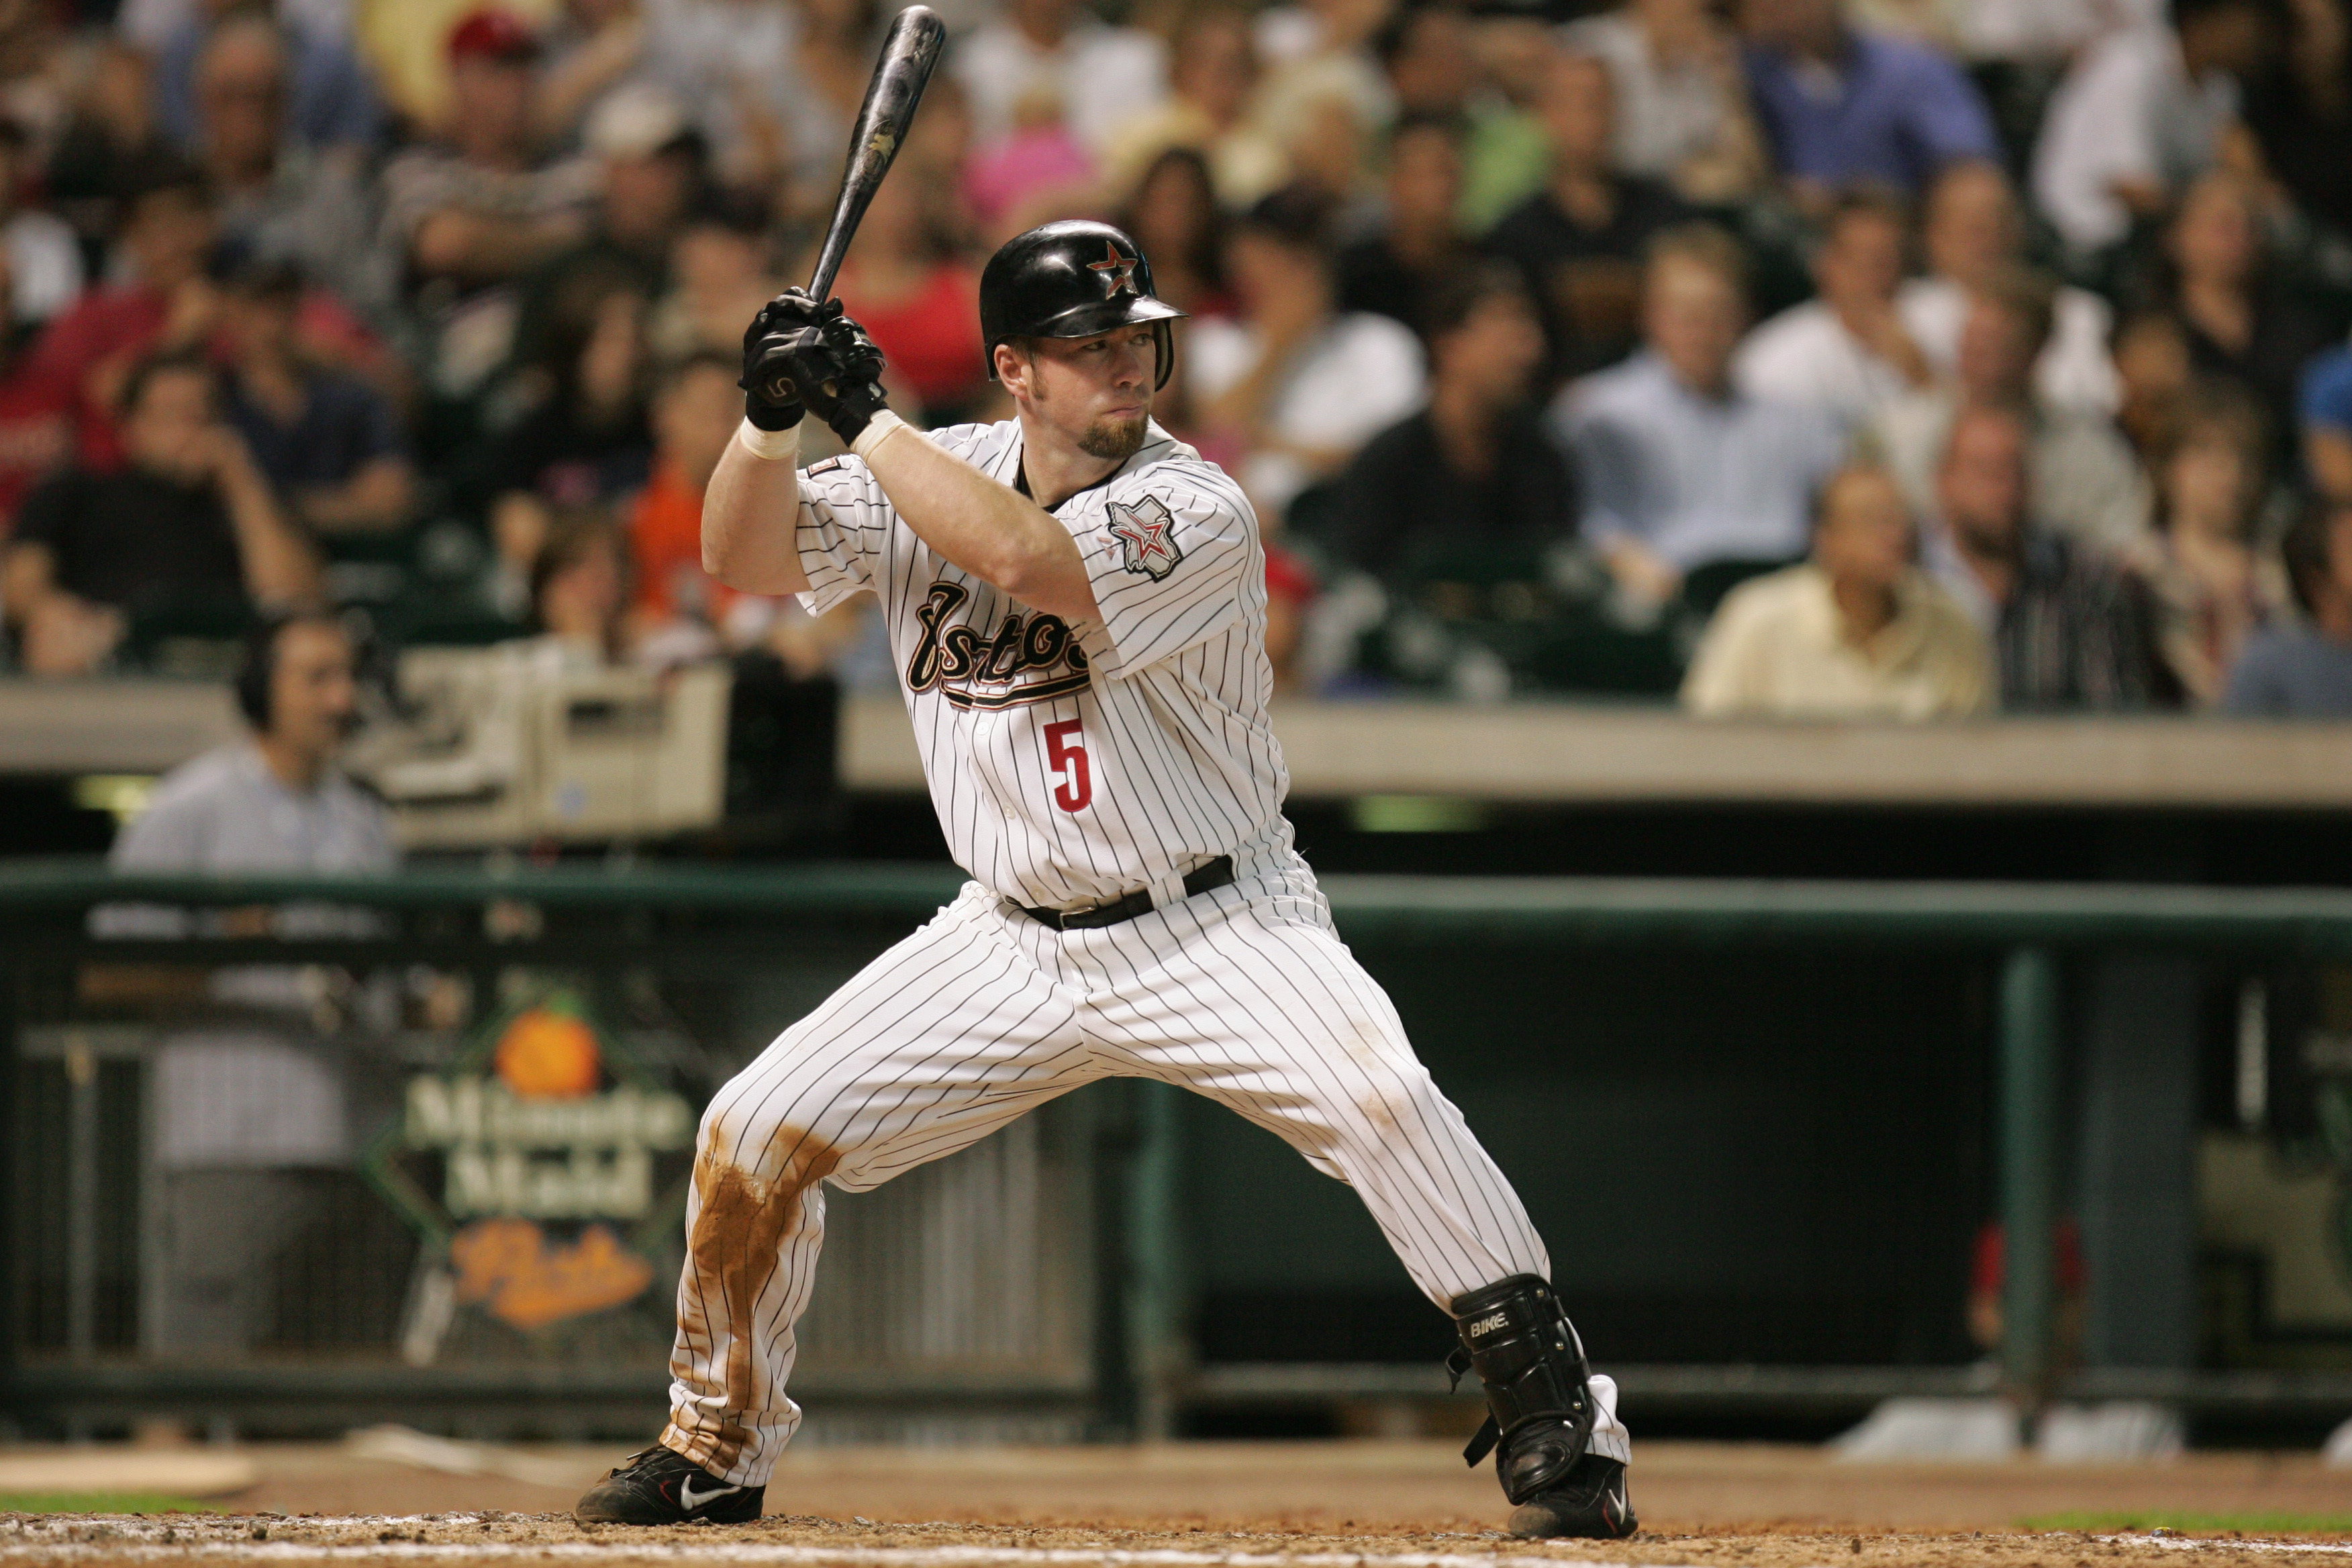 Houston Astros Jeff Bagwell: The trade that changed a franchise forever